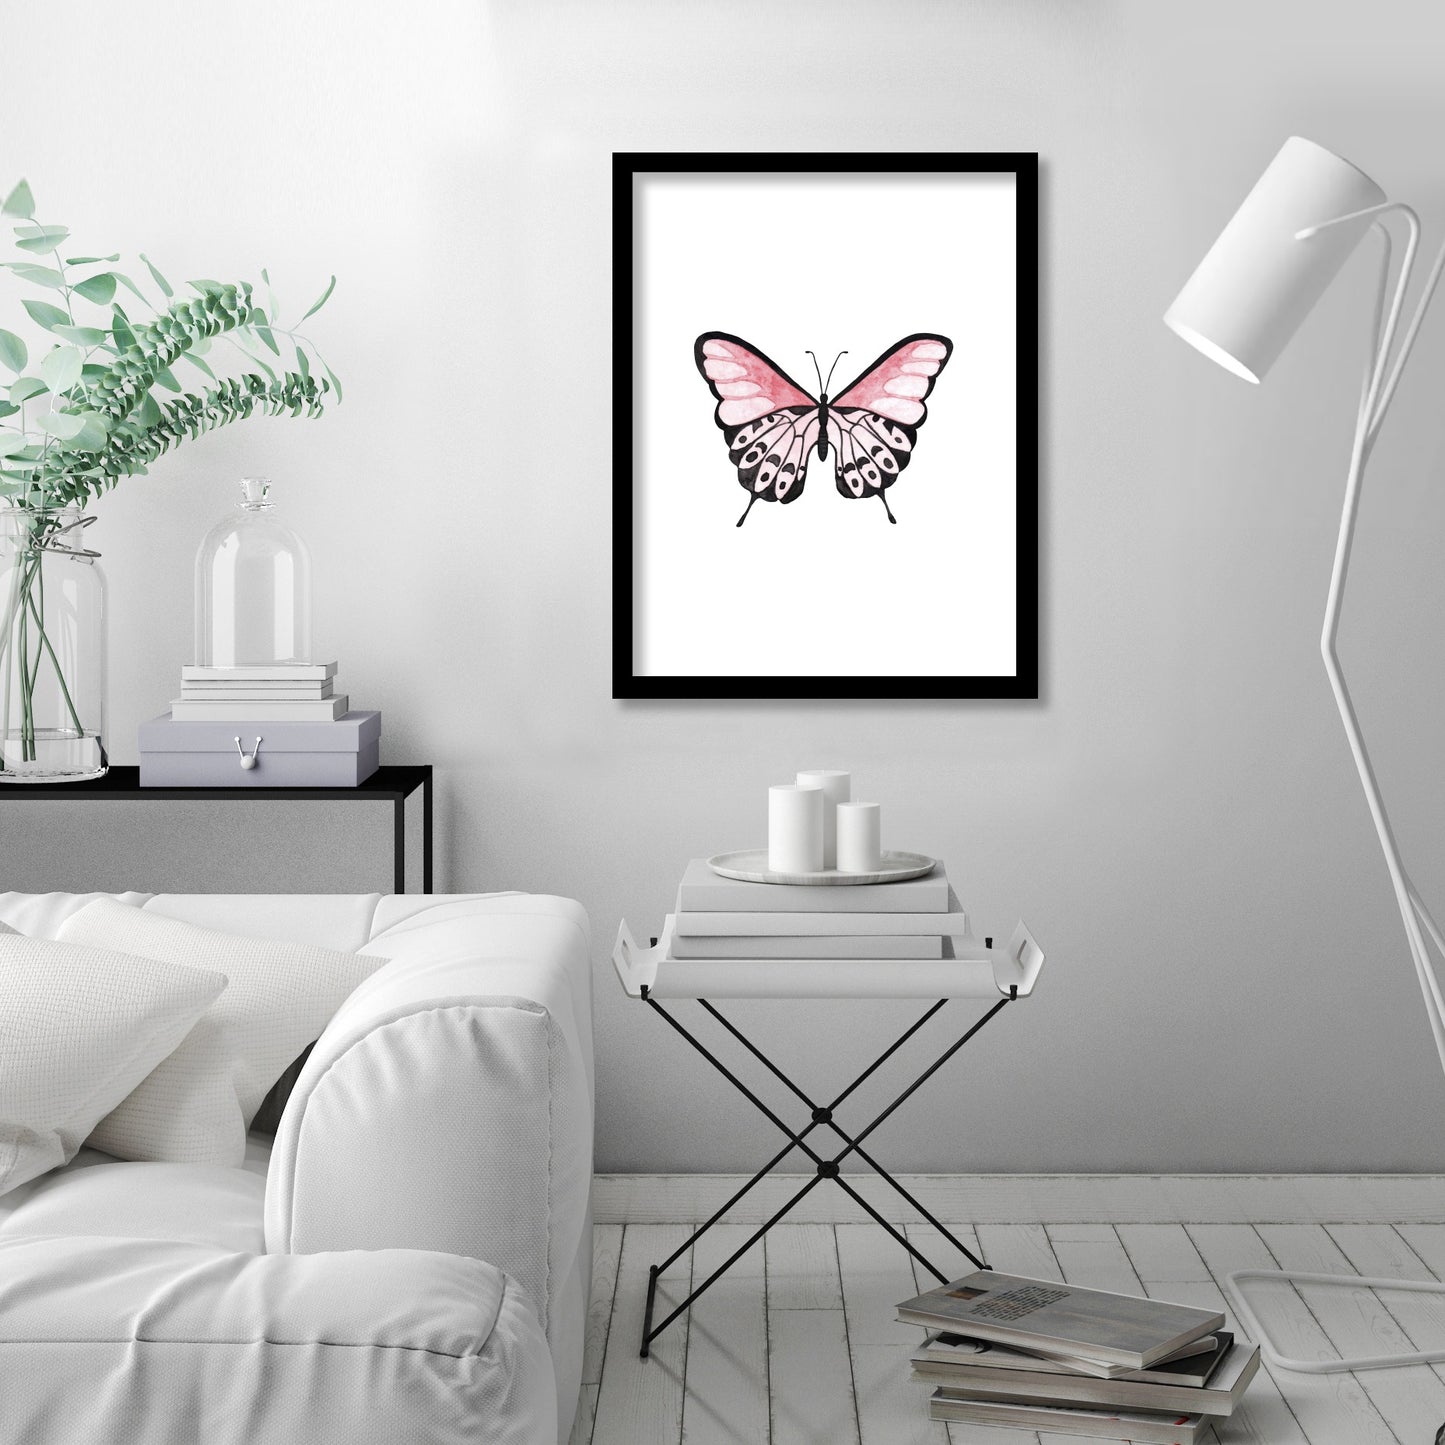 Pink Butterfly by Antonia Jurgens - Framed Print - Americanflat